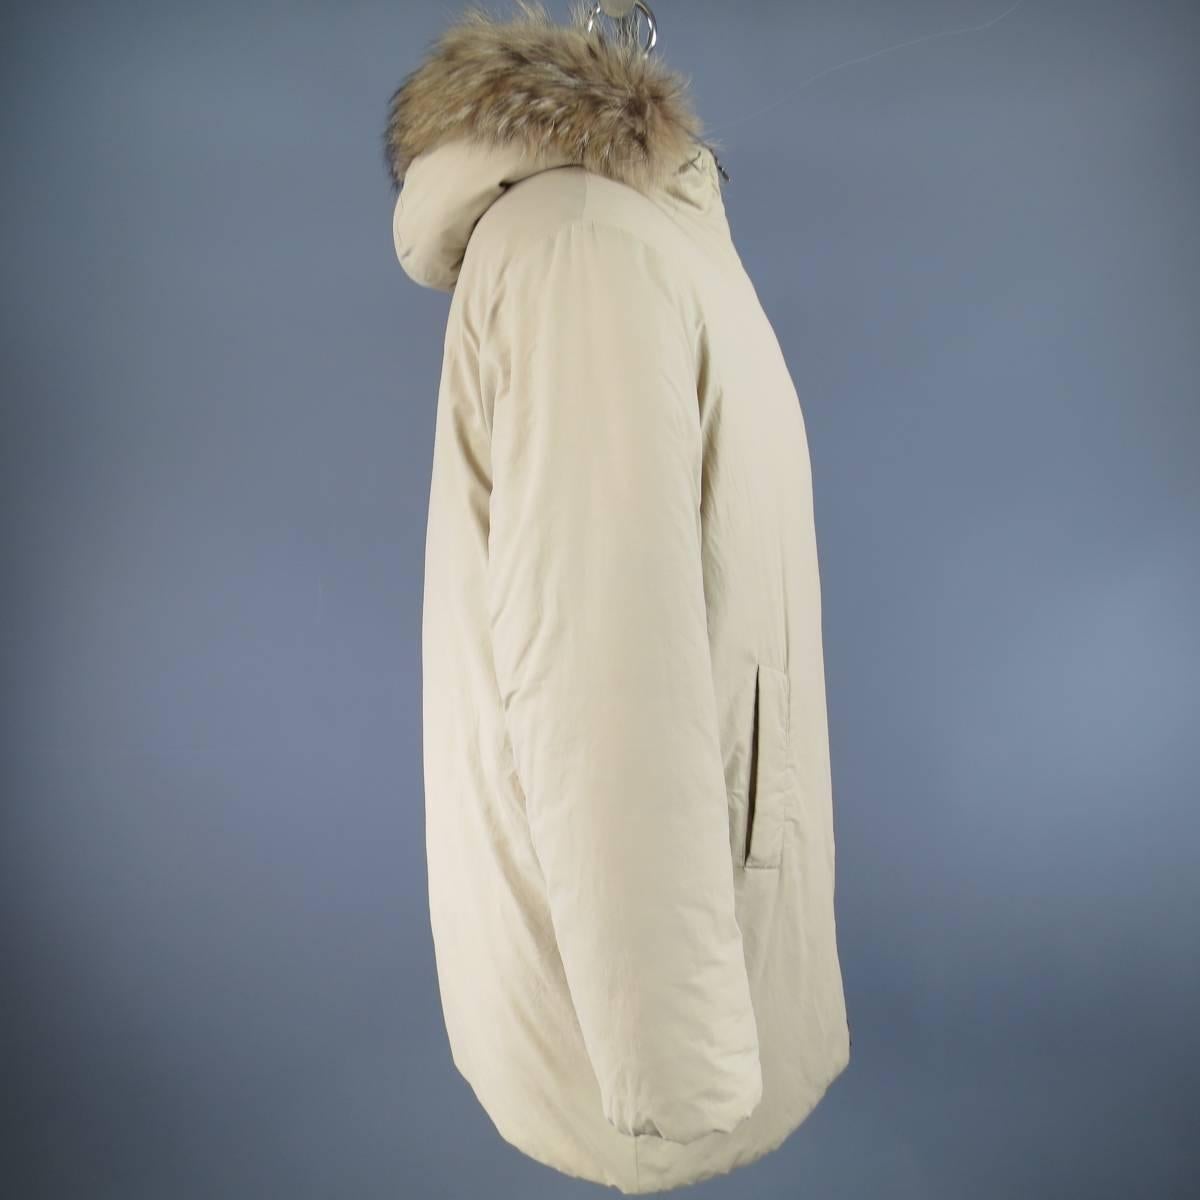 Winter PRADA parka in a warm khaki padded cotton blend featuring a high neck double zip closure, double slanted pockets, and racoon fur trimmed hood. Made in Italy.
 
Good Pre-Owned Condition.
Marked: M
 
Measurements:
 
Shoulder: 21